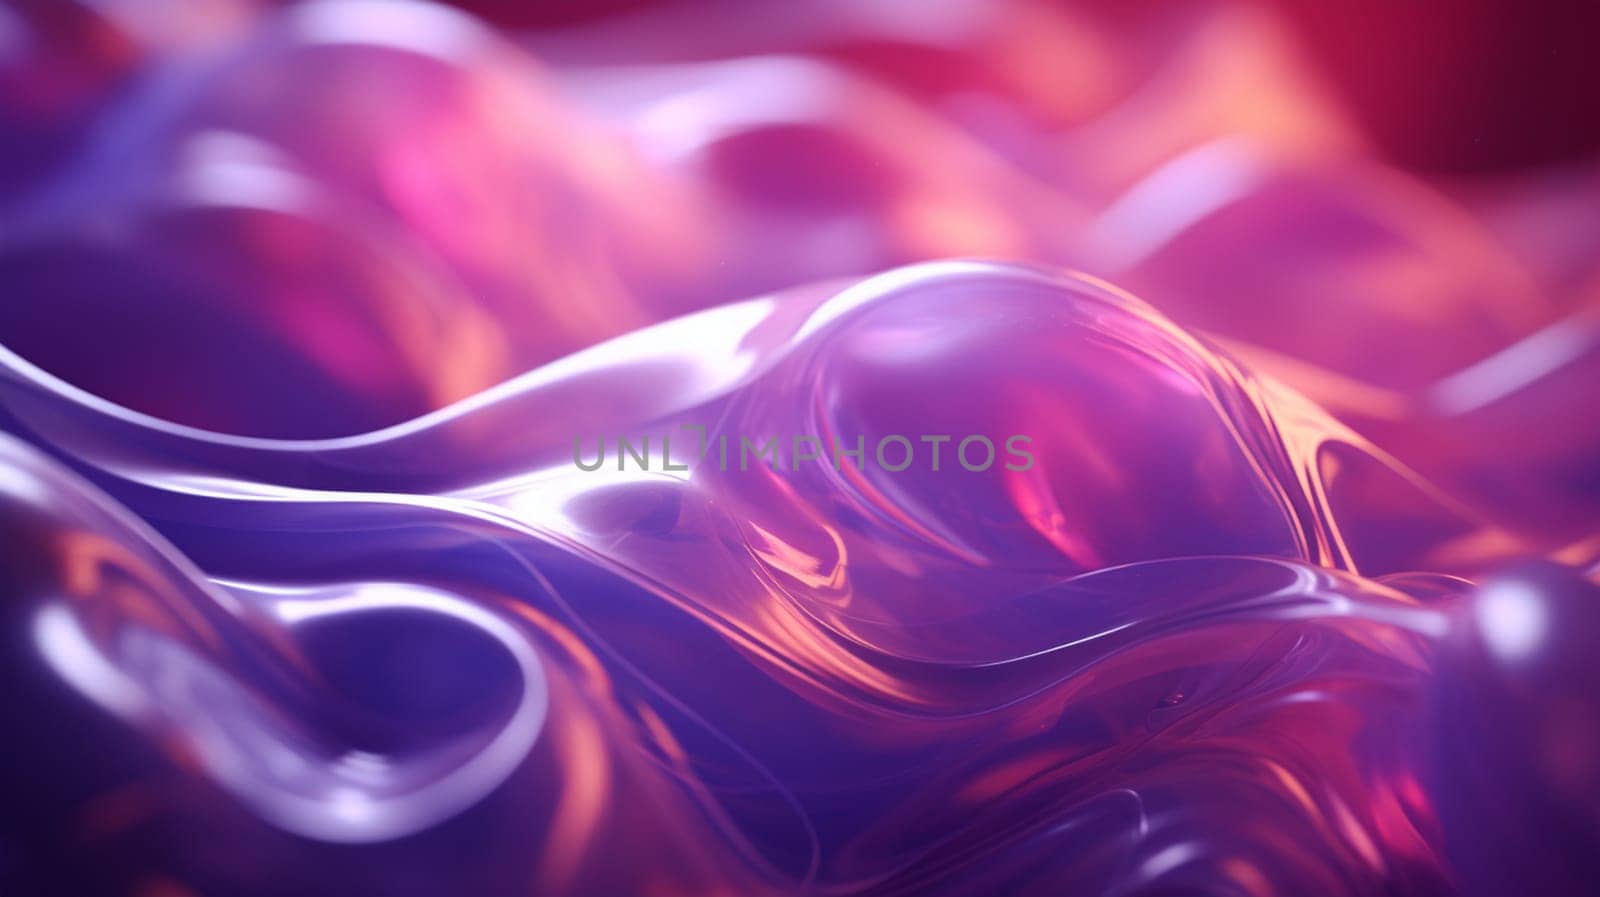 Gradient Trendy smoke waves colorful background wallpaper. 3D render creative smoke swoosh style soft lines. Abstract design smoke wavy pattern illustration wallpaper. High quality photo